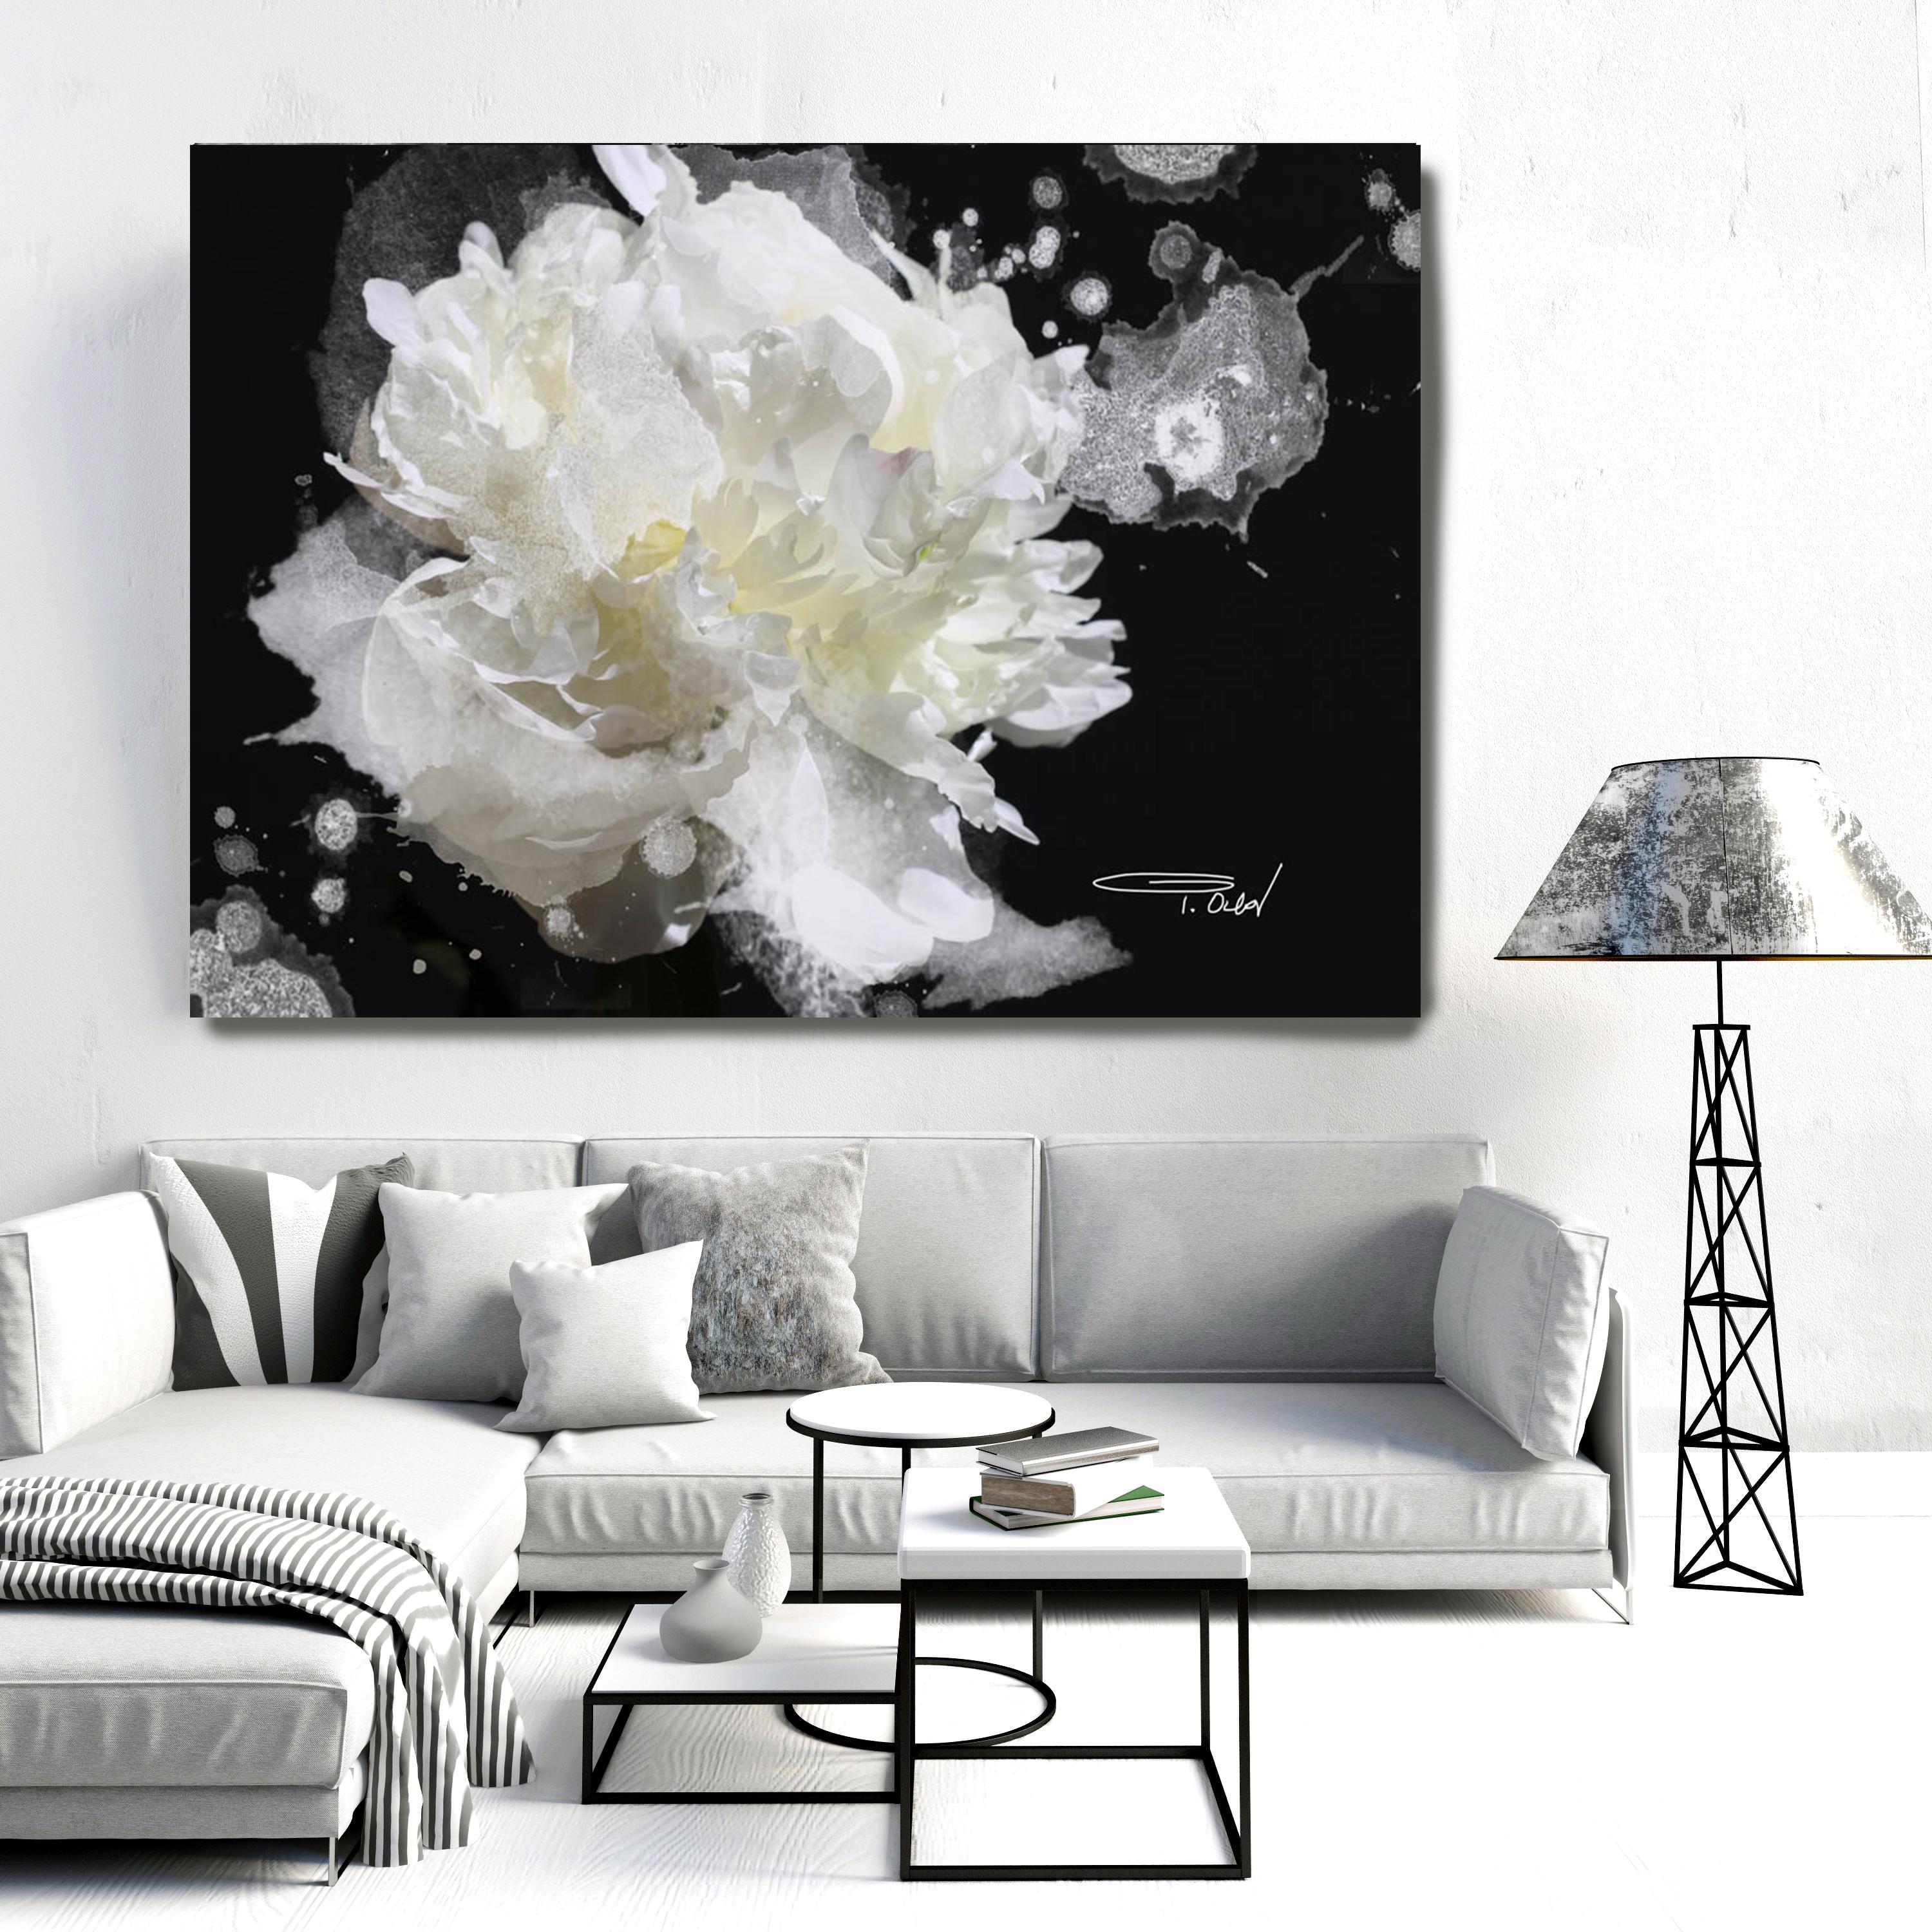 Black and White Floral Art Hand Embellished Giclee on Canvas 40H X 60W

State-of-the-art HAND EMBELLISHED ∽ MUSEUM QUALITY ∽ DISPLAY READY Giclee Reproduction
Each limited edition Giclee is hand embellished by the artist, making it one of a kind